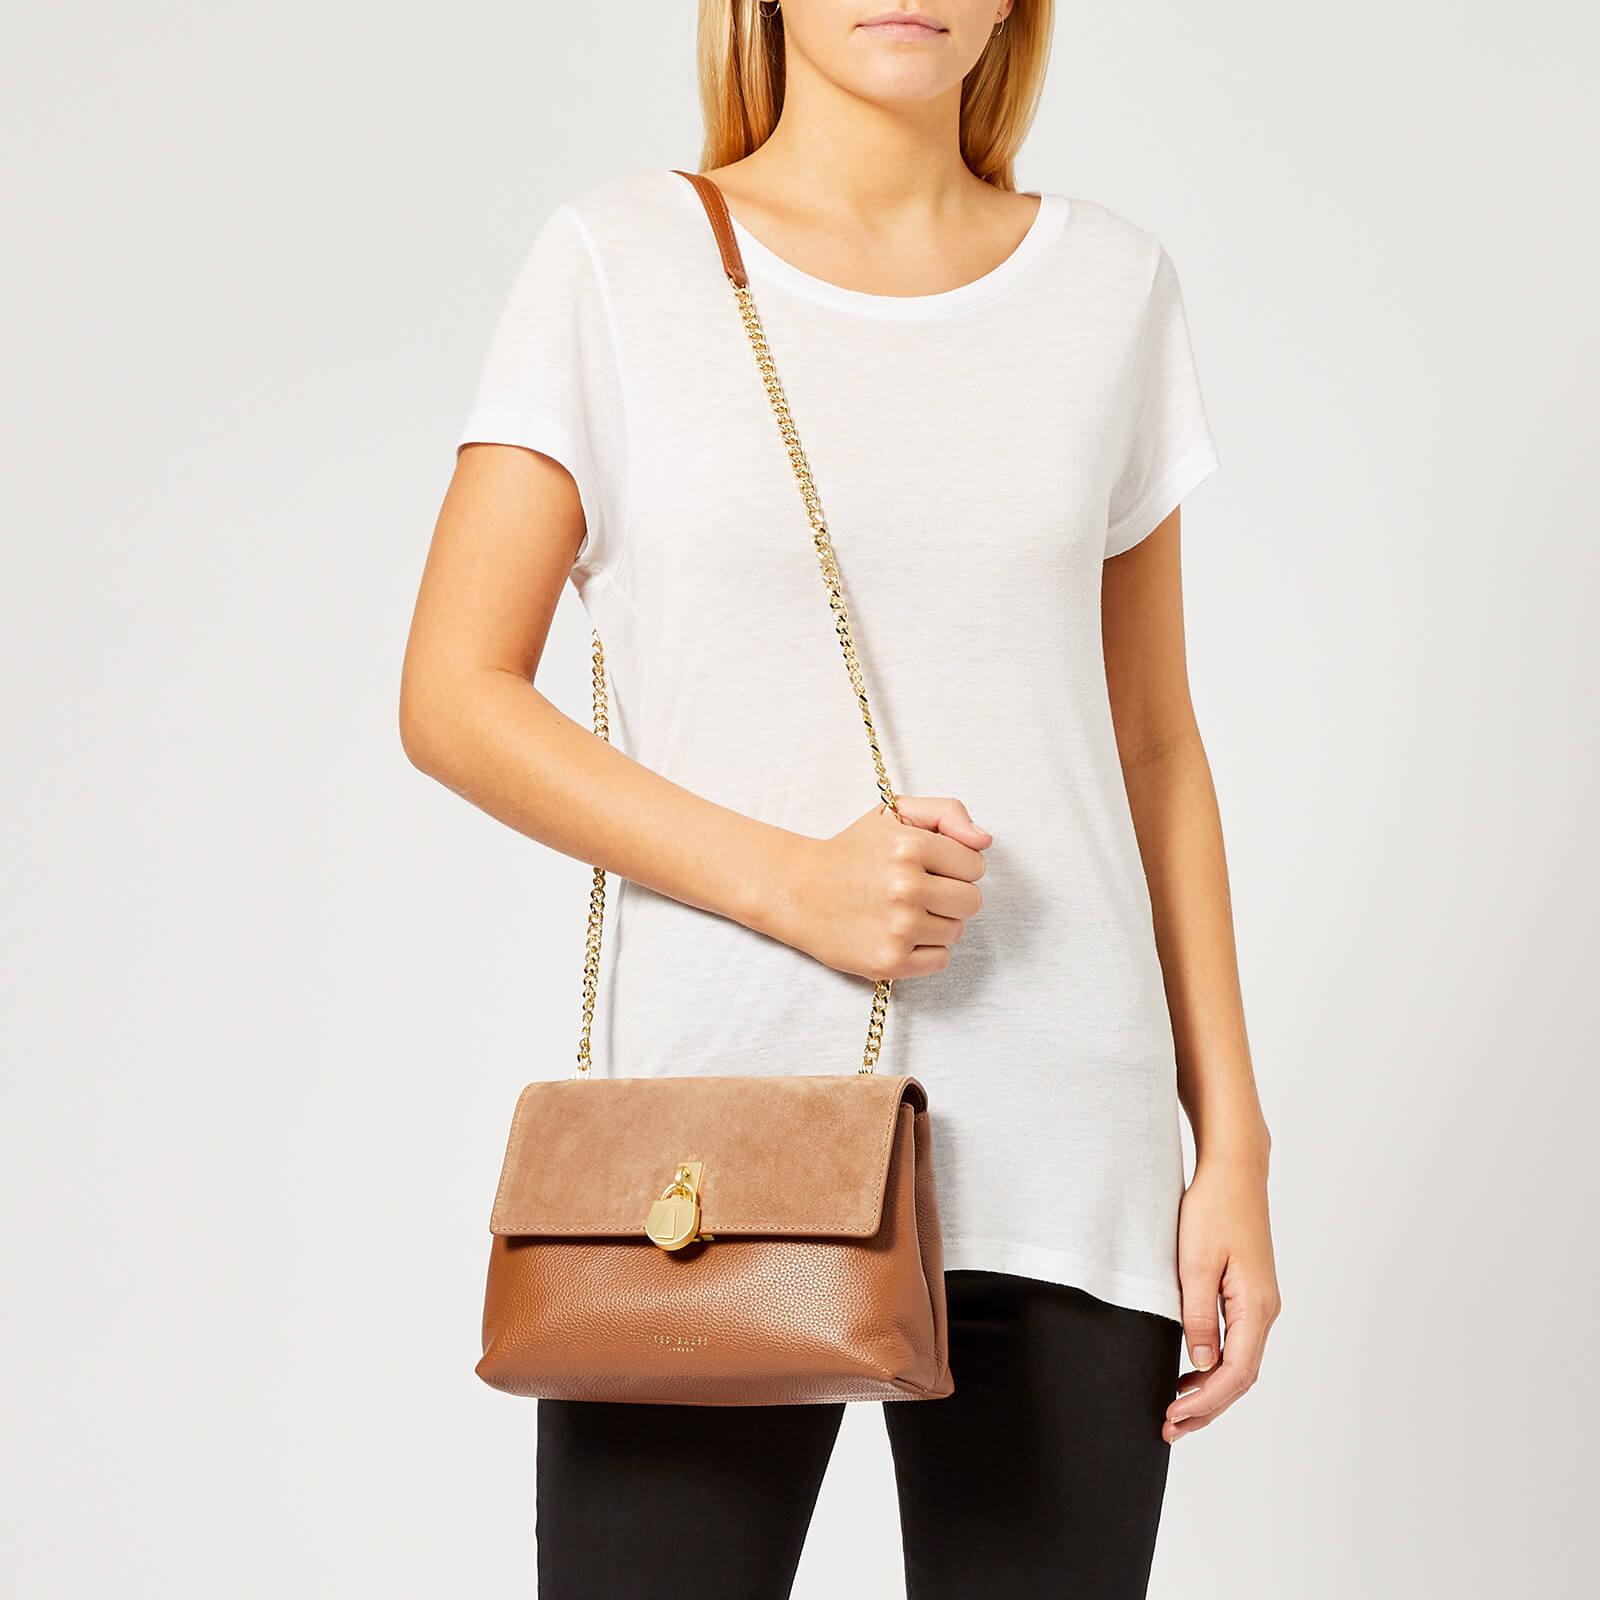 Helena New Zealand Beige with Gold bag – Bold Baguette